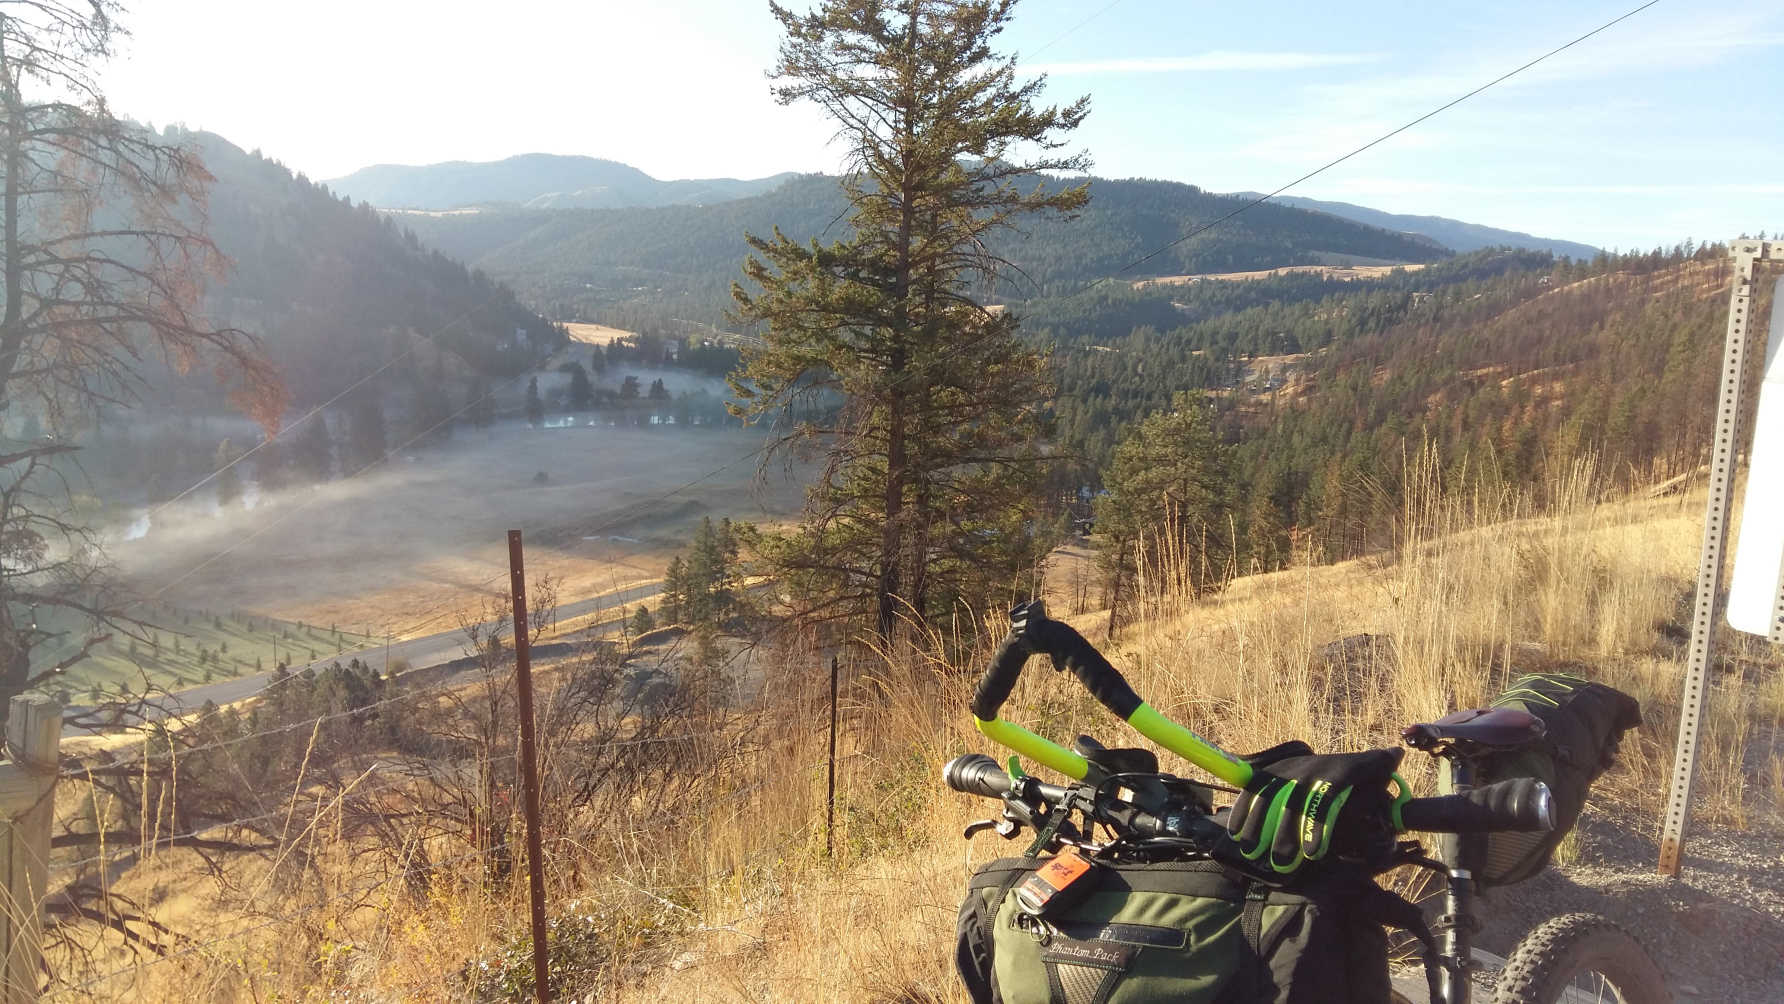  Looking down on Rock Creek and Kettle Valley from Hwy #3 